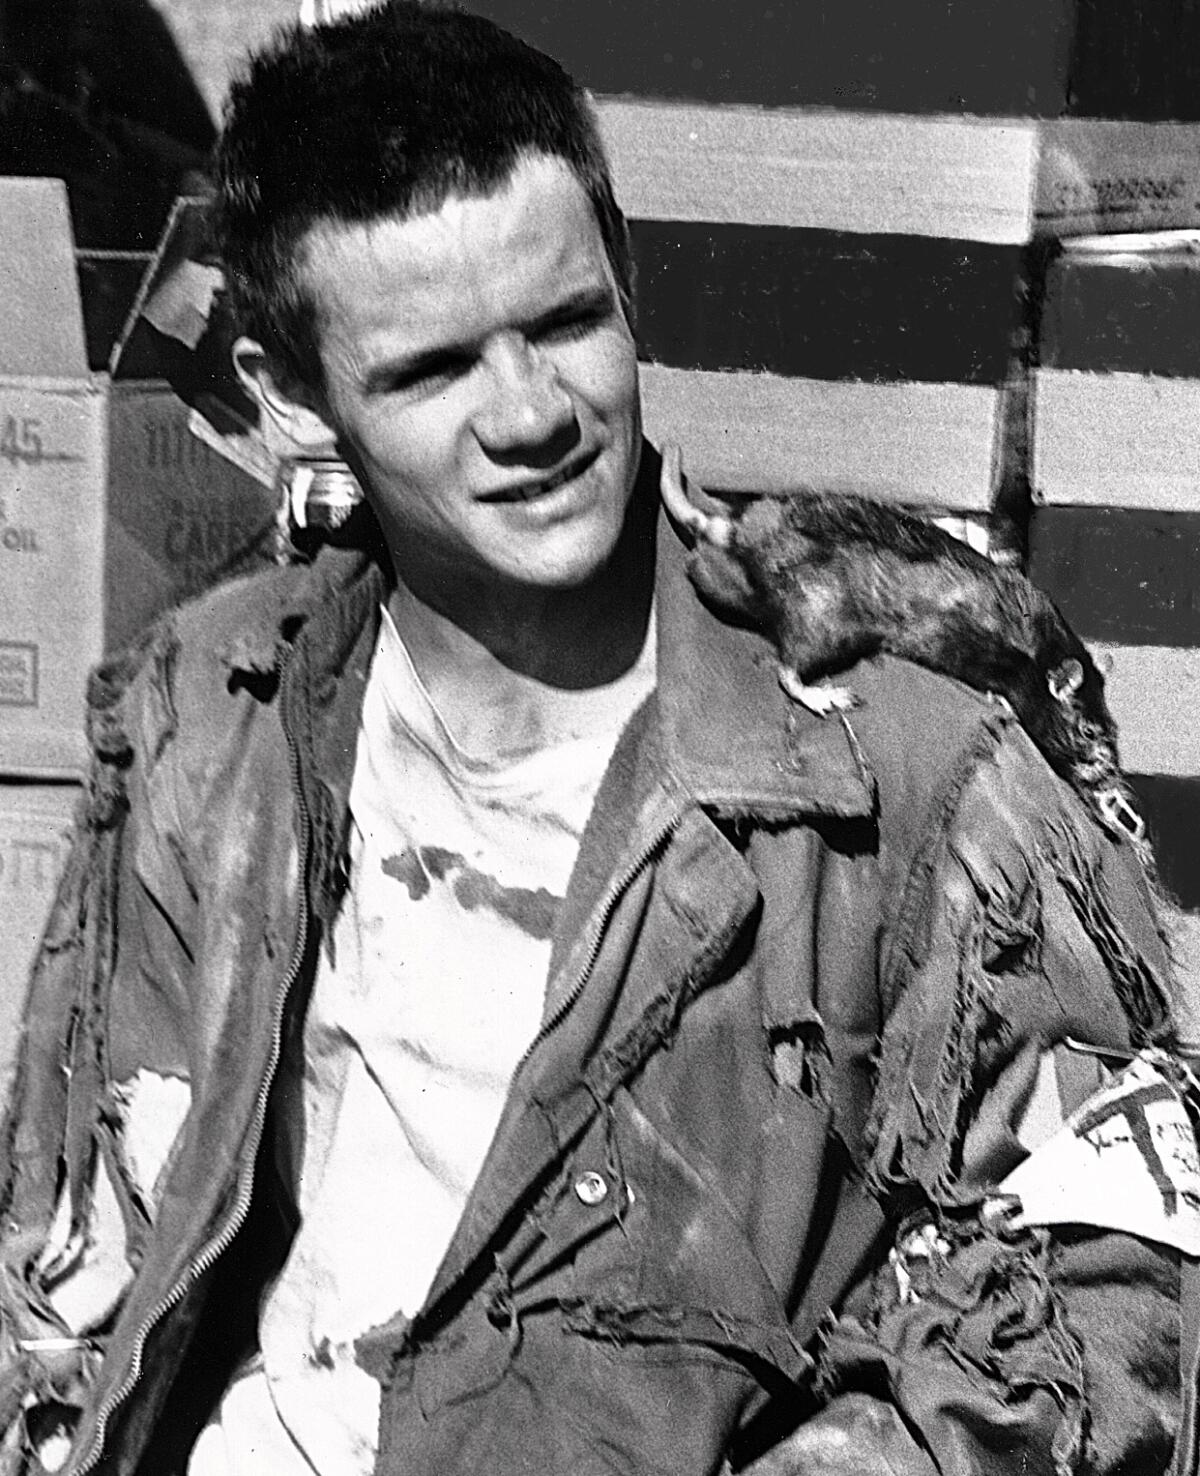 A young punk in tattered clothes with a rat on his shoulder